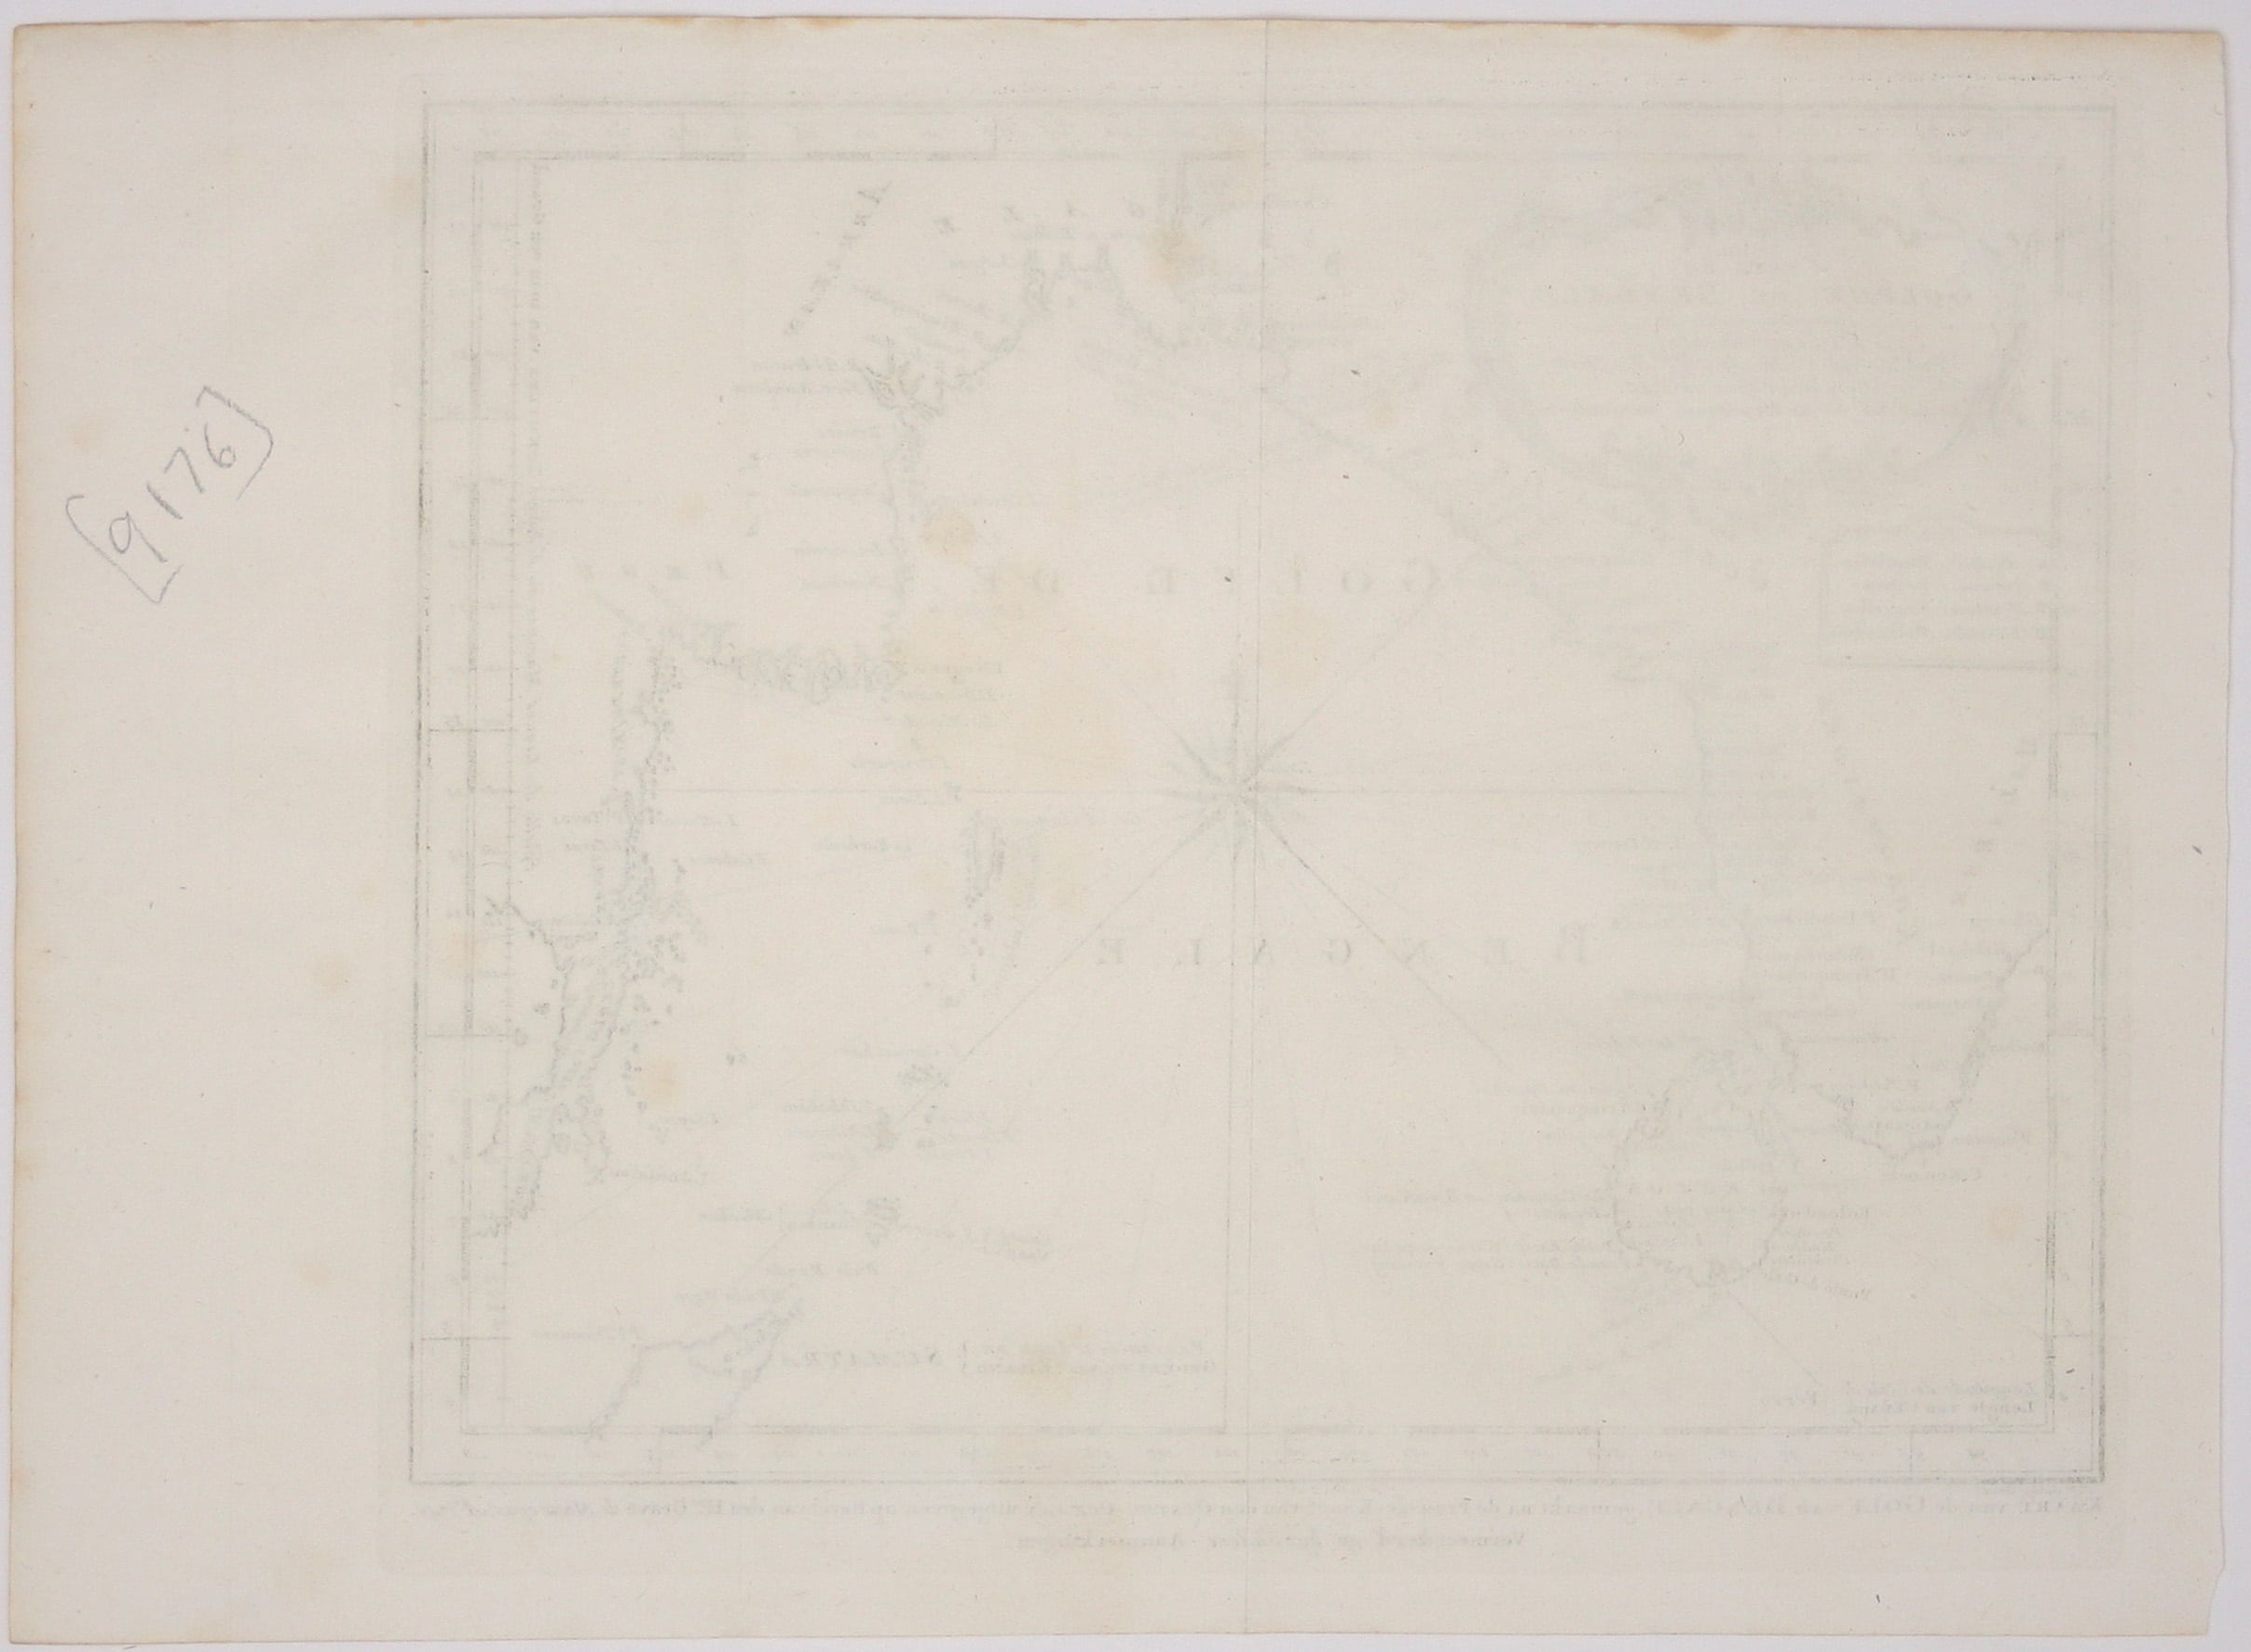 Bellin’s Map of the Bay of Bengal